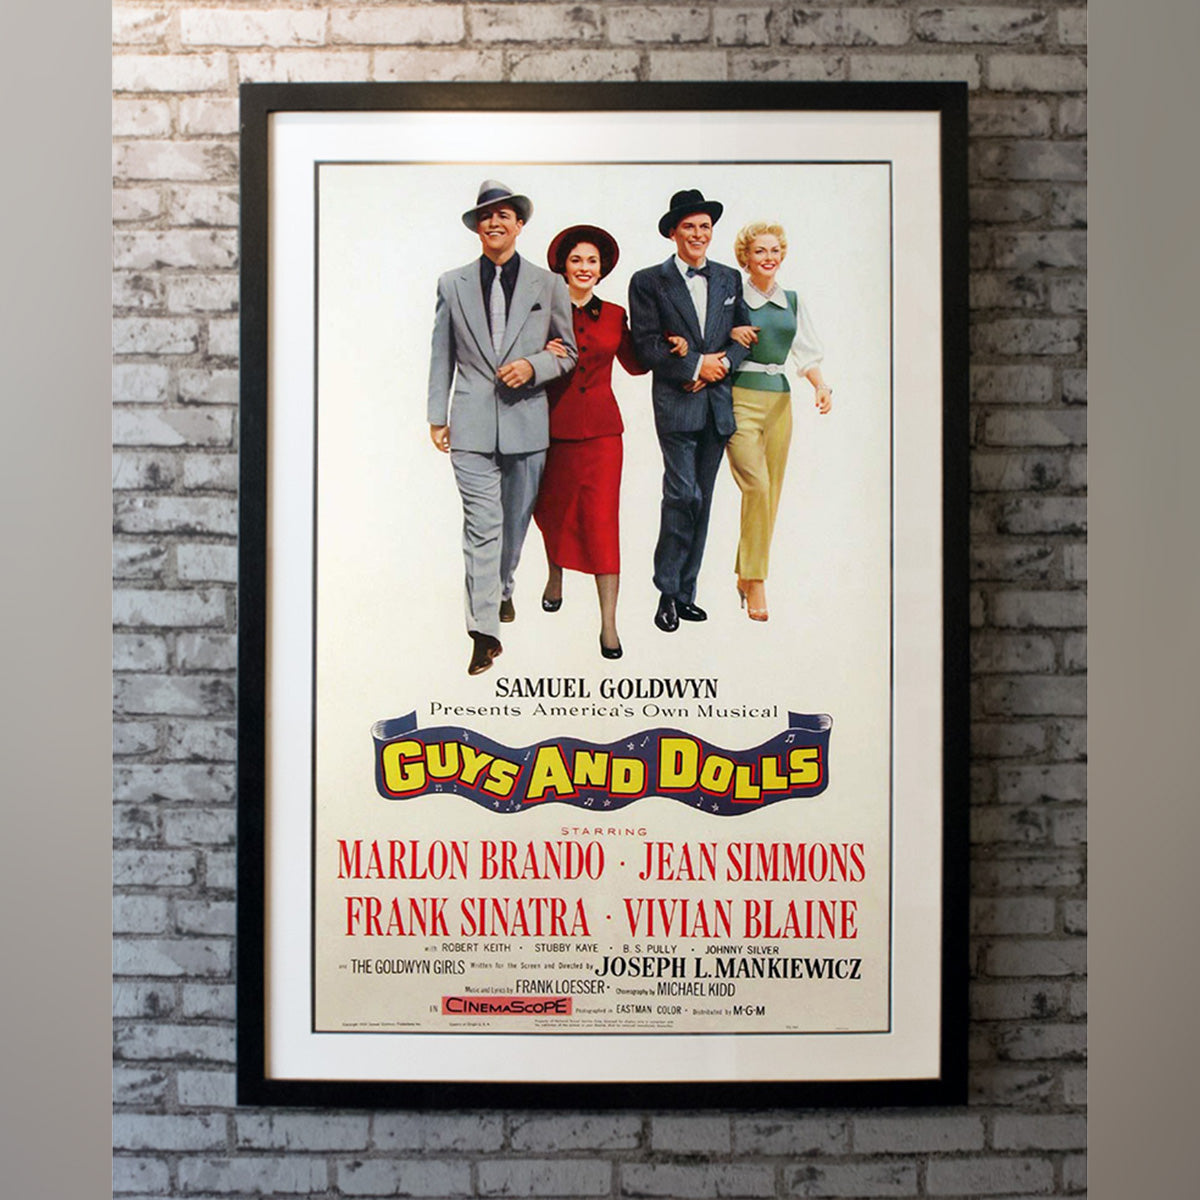 Original Movie Poster of Guys And Dolls (1955)